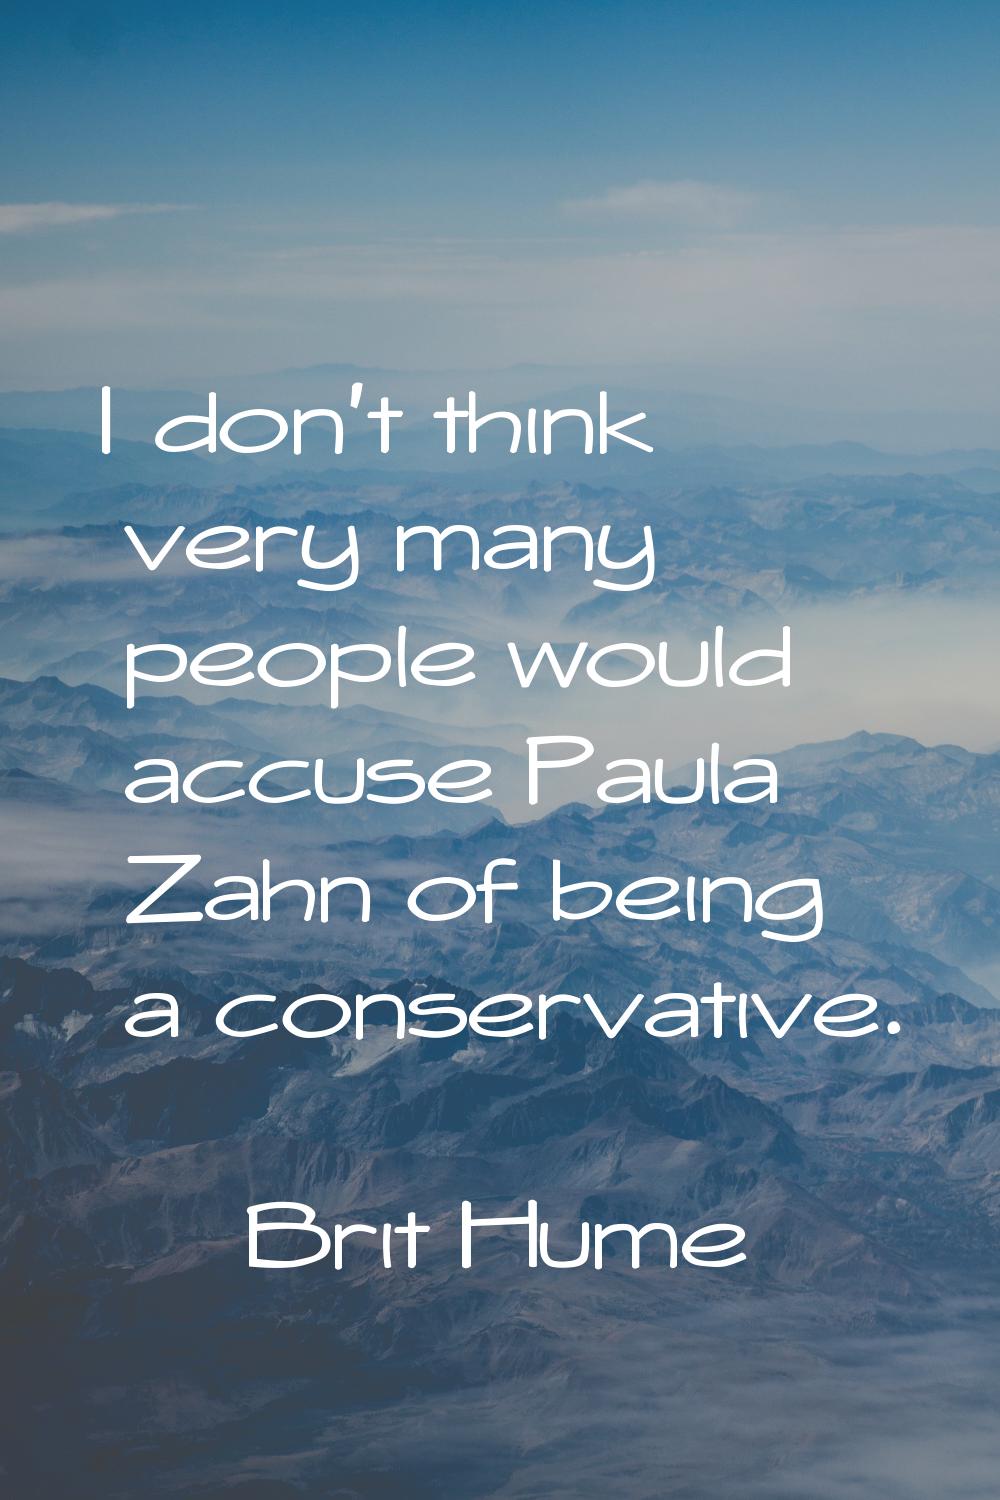 I don't think very many people would accuse Paula Zahn of being a conservative.